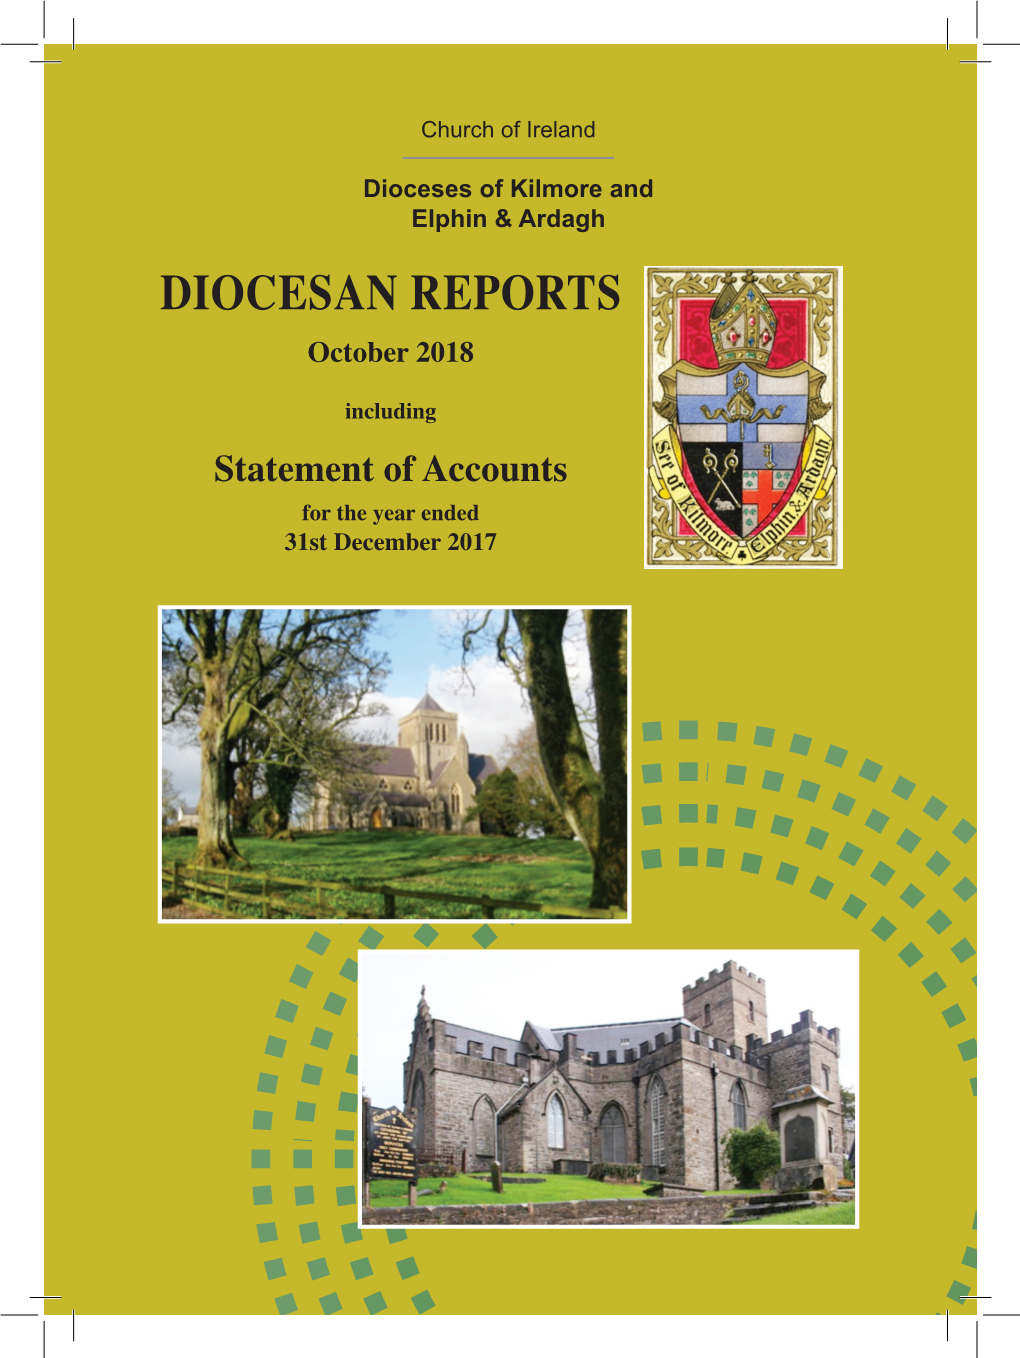 To Download a Copy of the 2018 Diocesan Reports